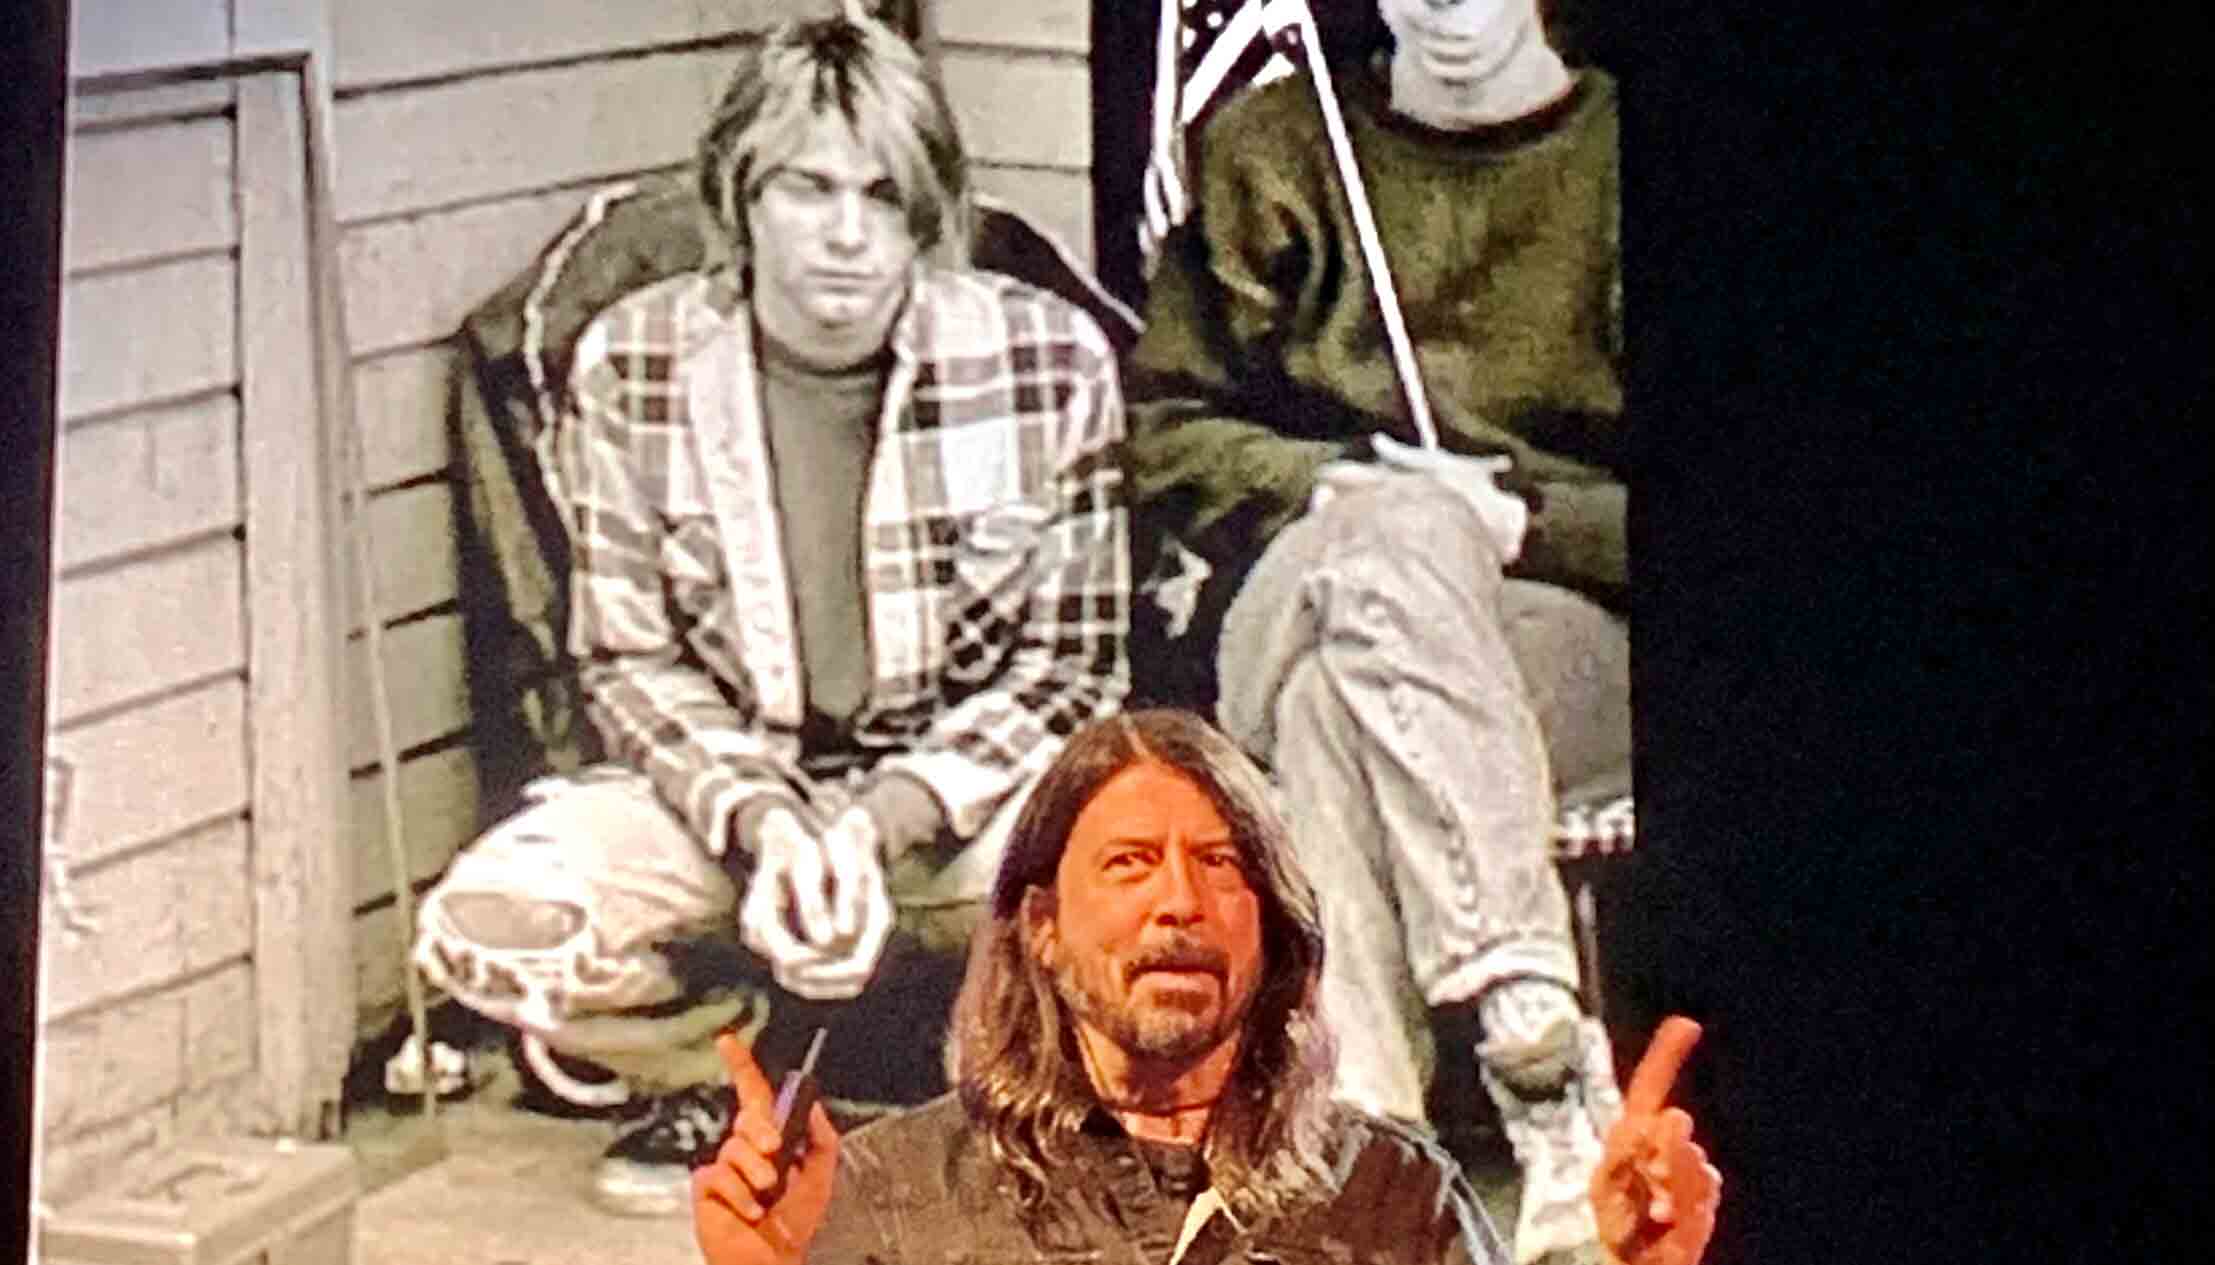 Dave Grohl shares his personal and musical encounters in 'The Storyteller